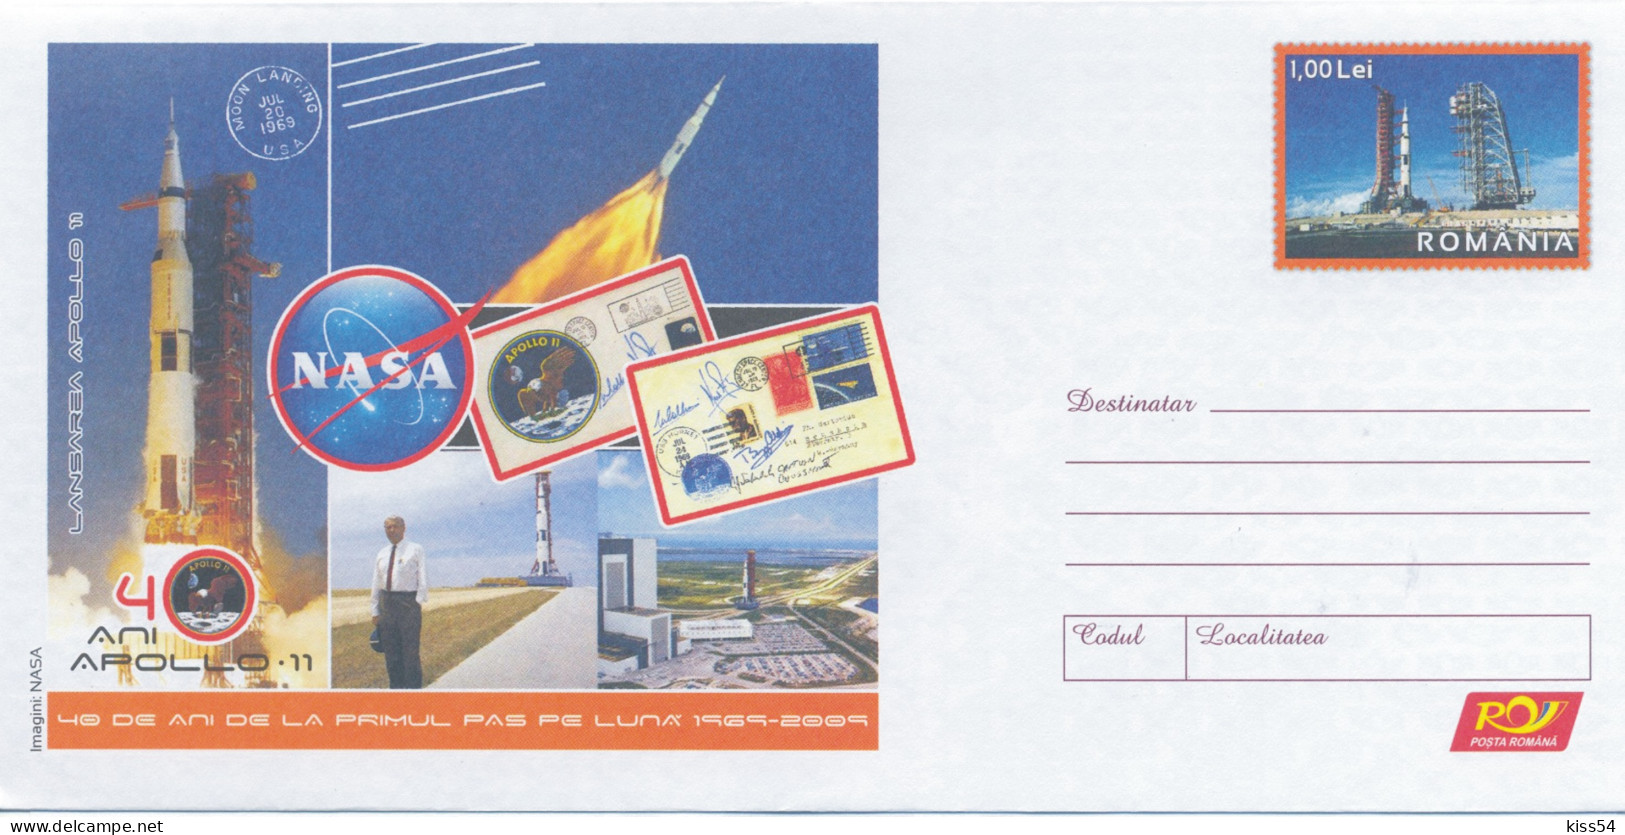 IP 2009 - 30 Cosmos, 40 YEARS SINCE DE FIRST STEP ON THE MOON - Stationery - Unused - 2009 - Ganzsachen